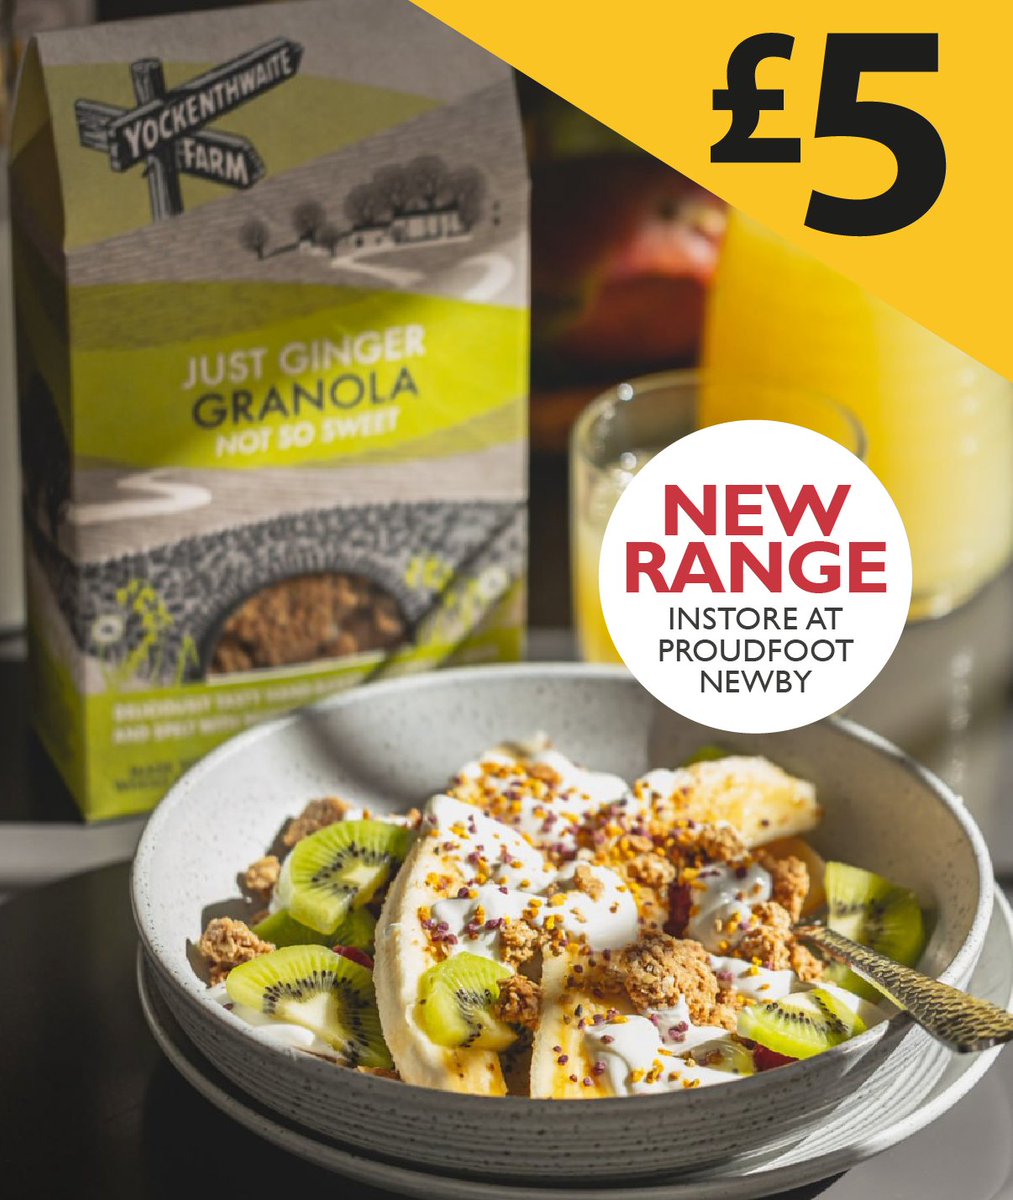 New range in store, fresh from the heart of the Yorkshire Dales 🥣 Start the day with a bowl of @Yockgranola own-recipe Ginger Granola 475g, bursting with delicious flavour to fuel you through your day. Available at our Proudfoot Newby store for just £5 while stocks last.